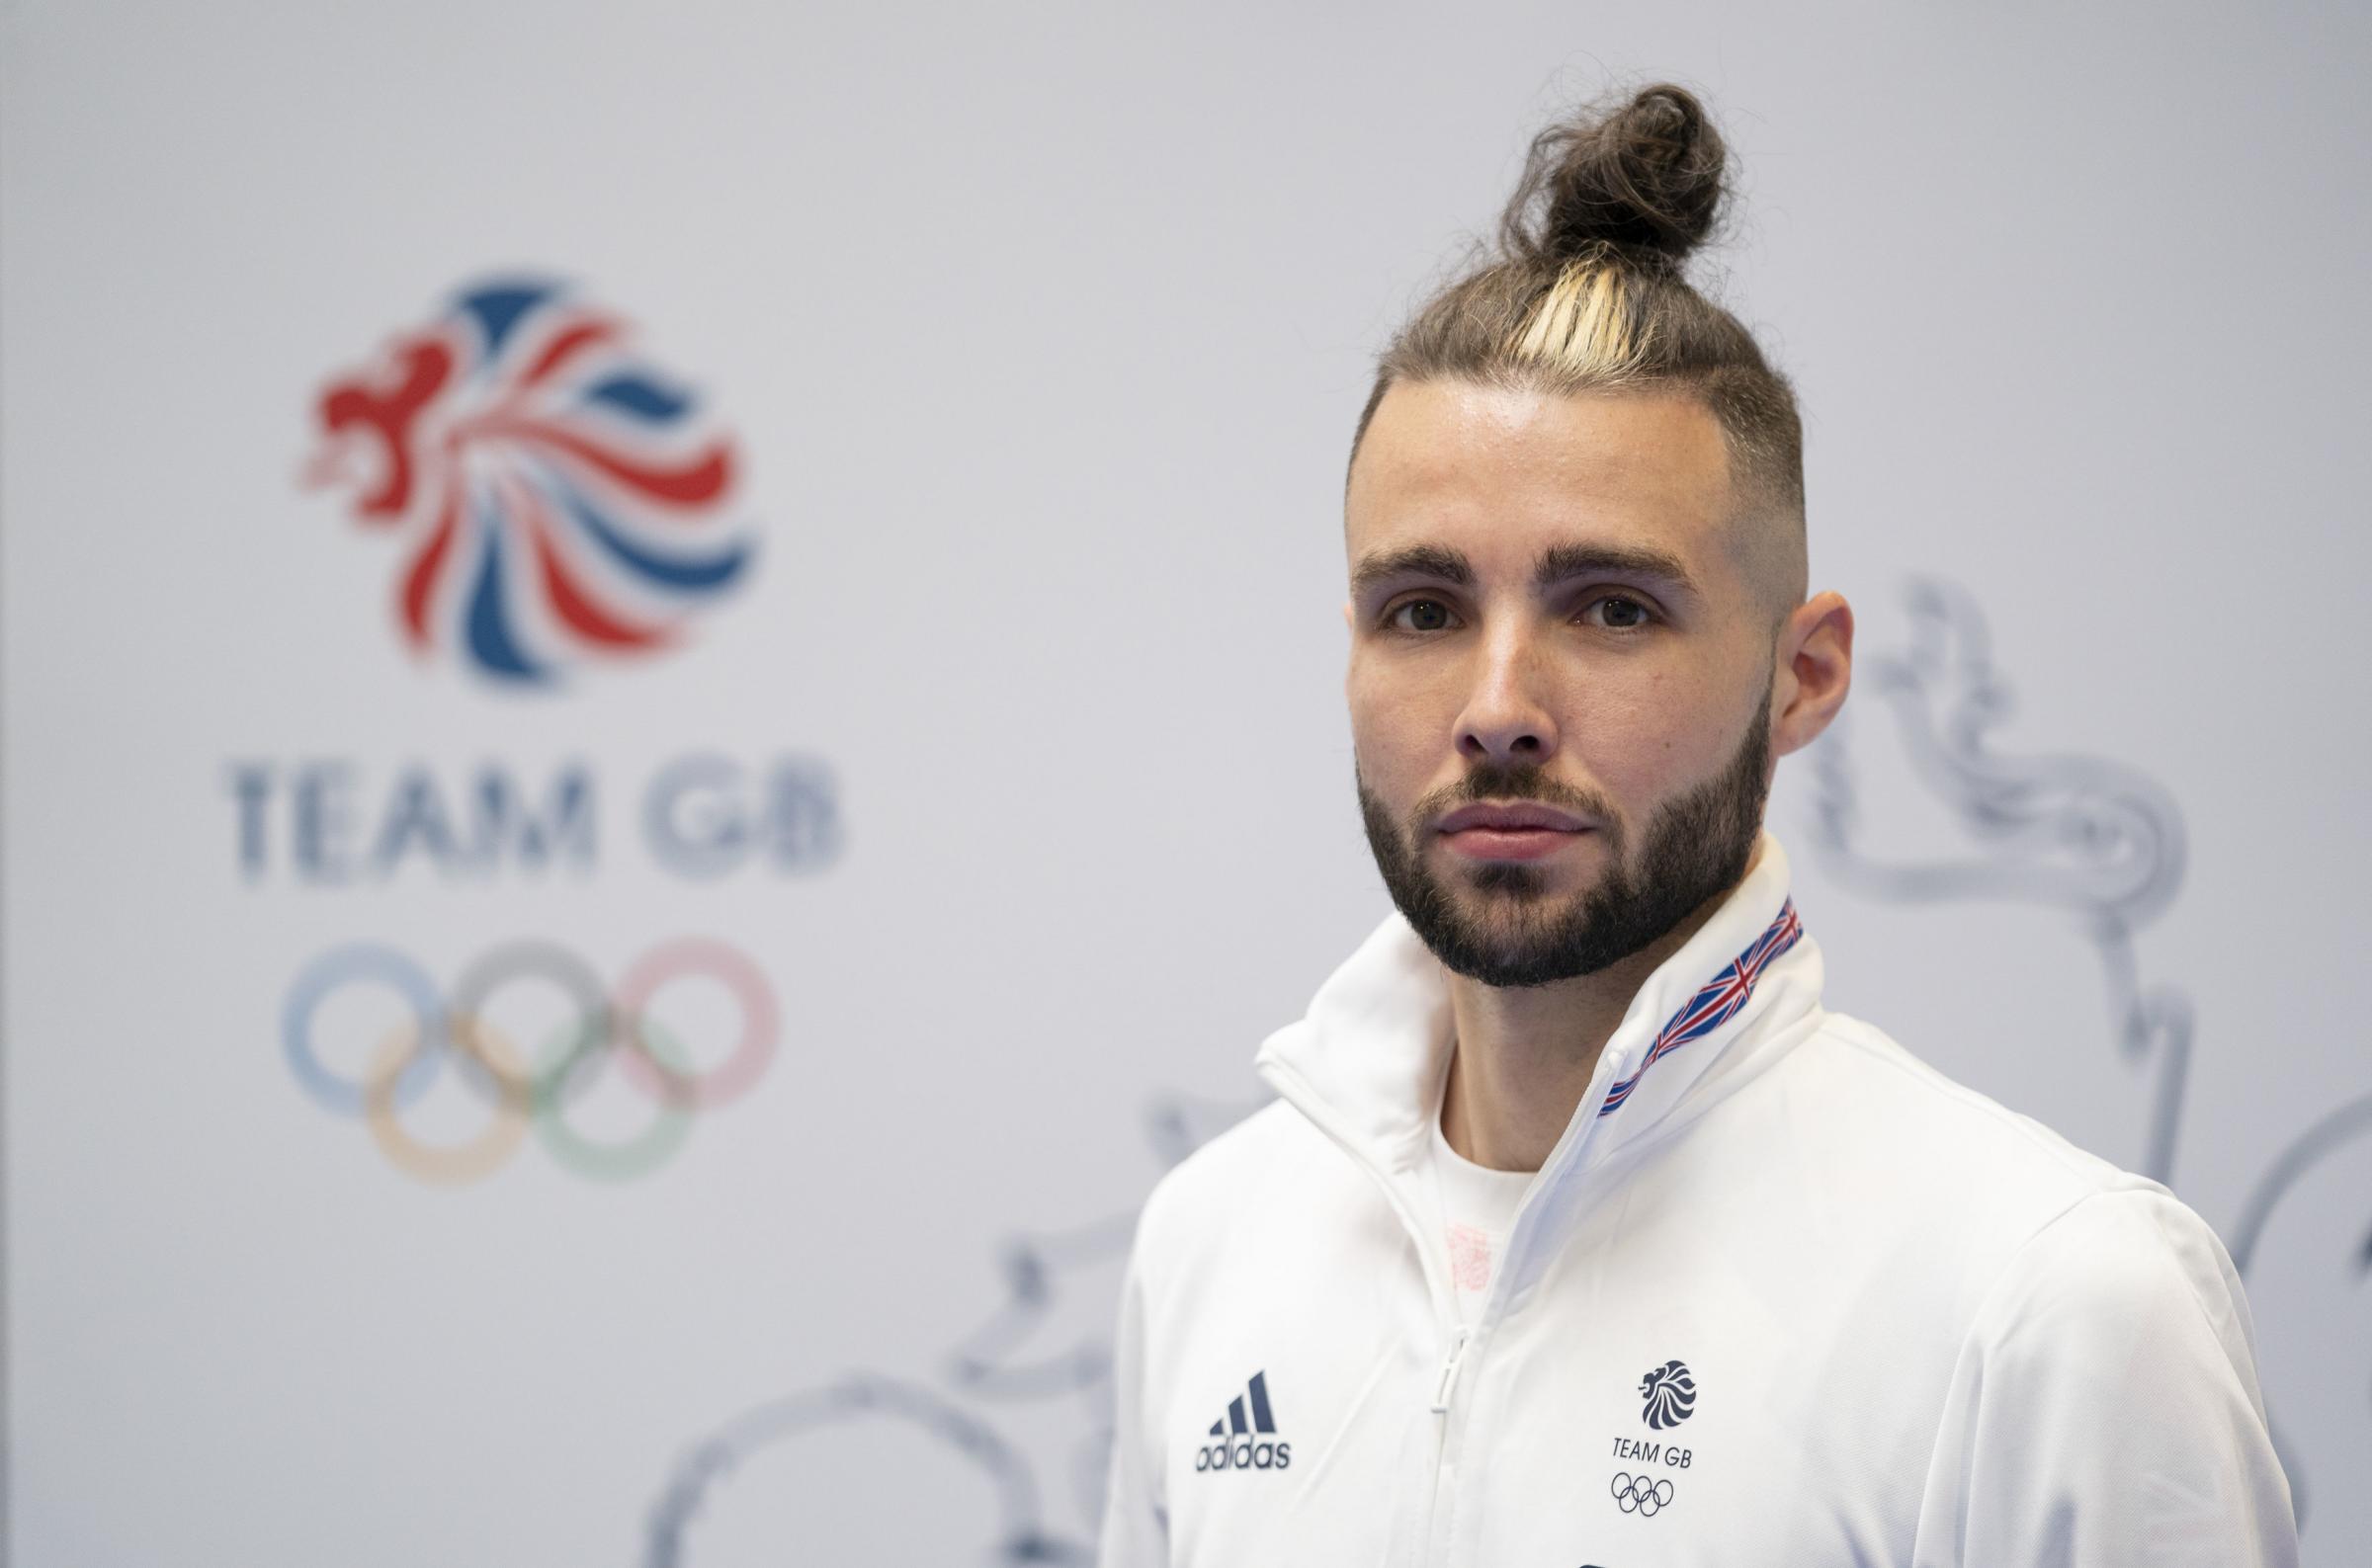 Sean Vendy will represent Team GB at the 2020 Olympics in badmintion in Tokyo (PA)